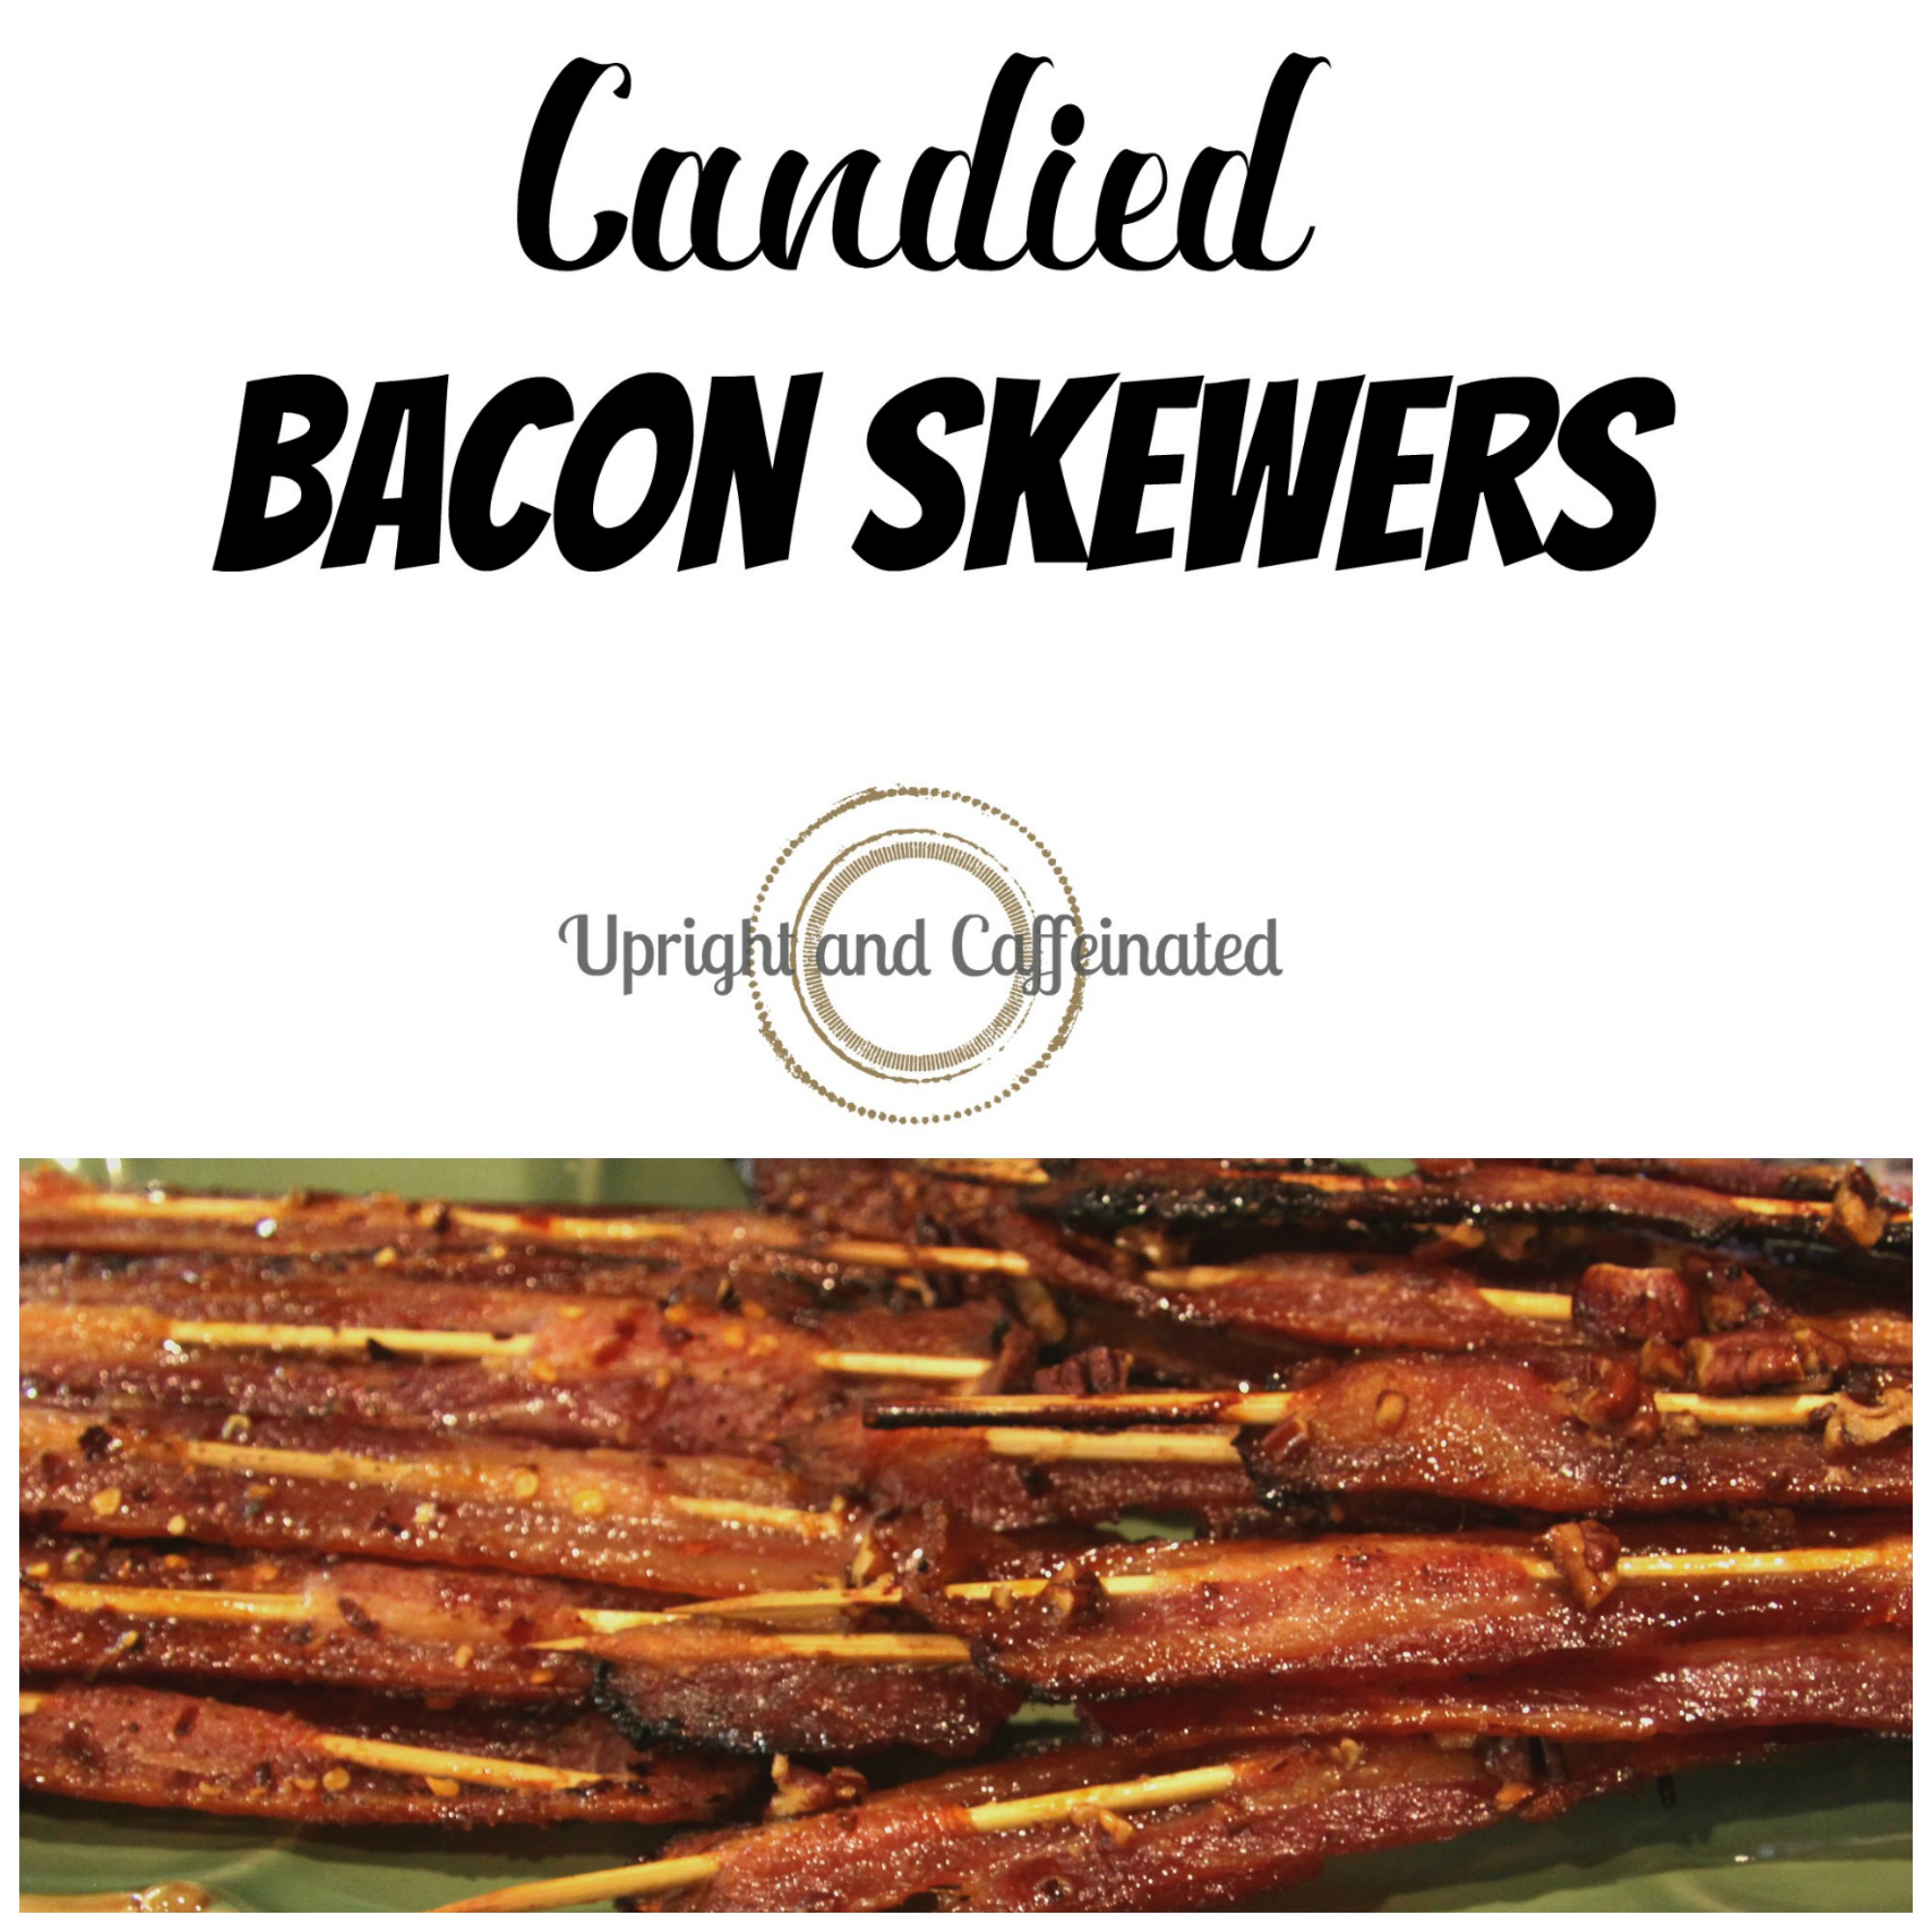 Candied Bacon Skewers